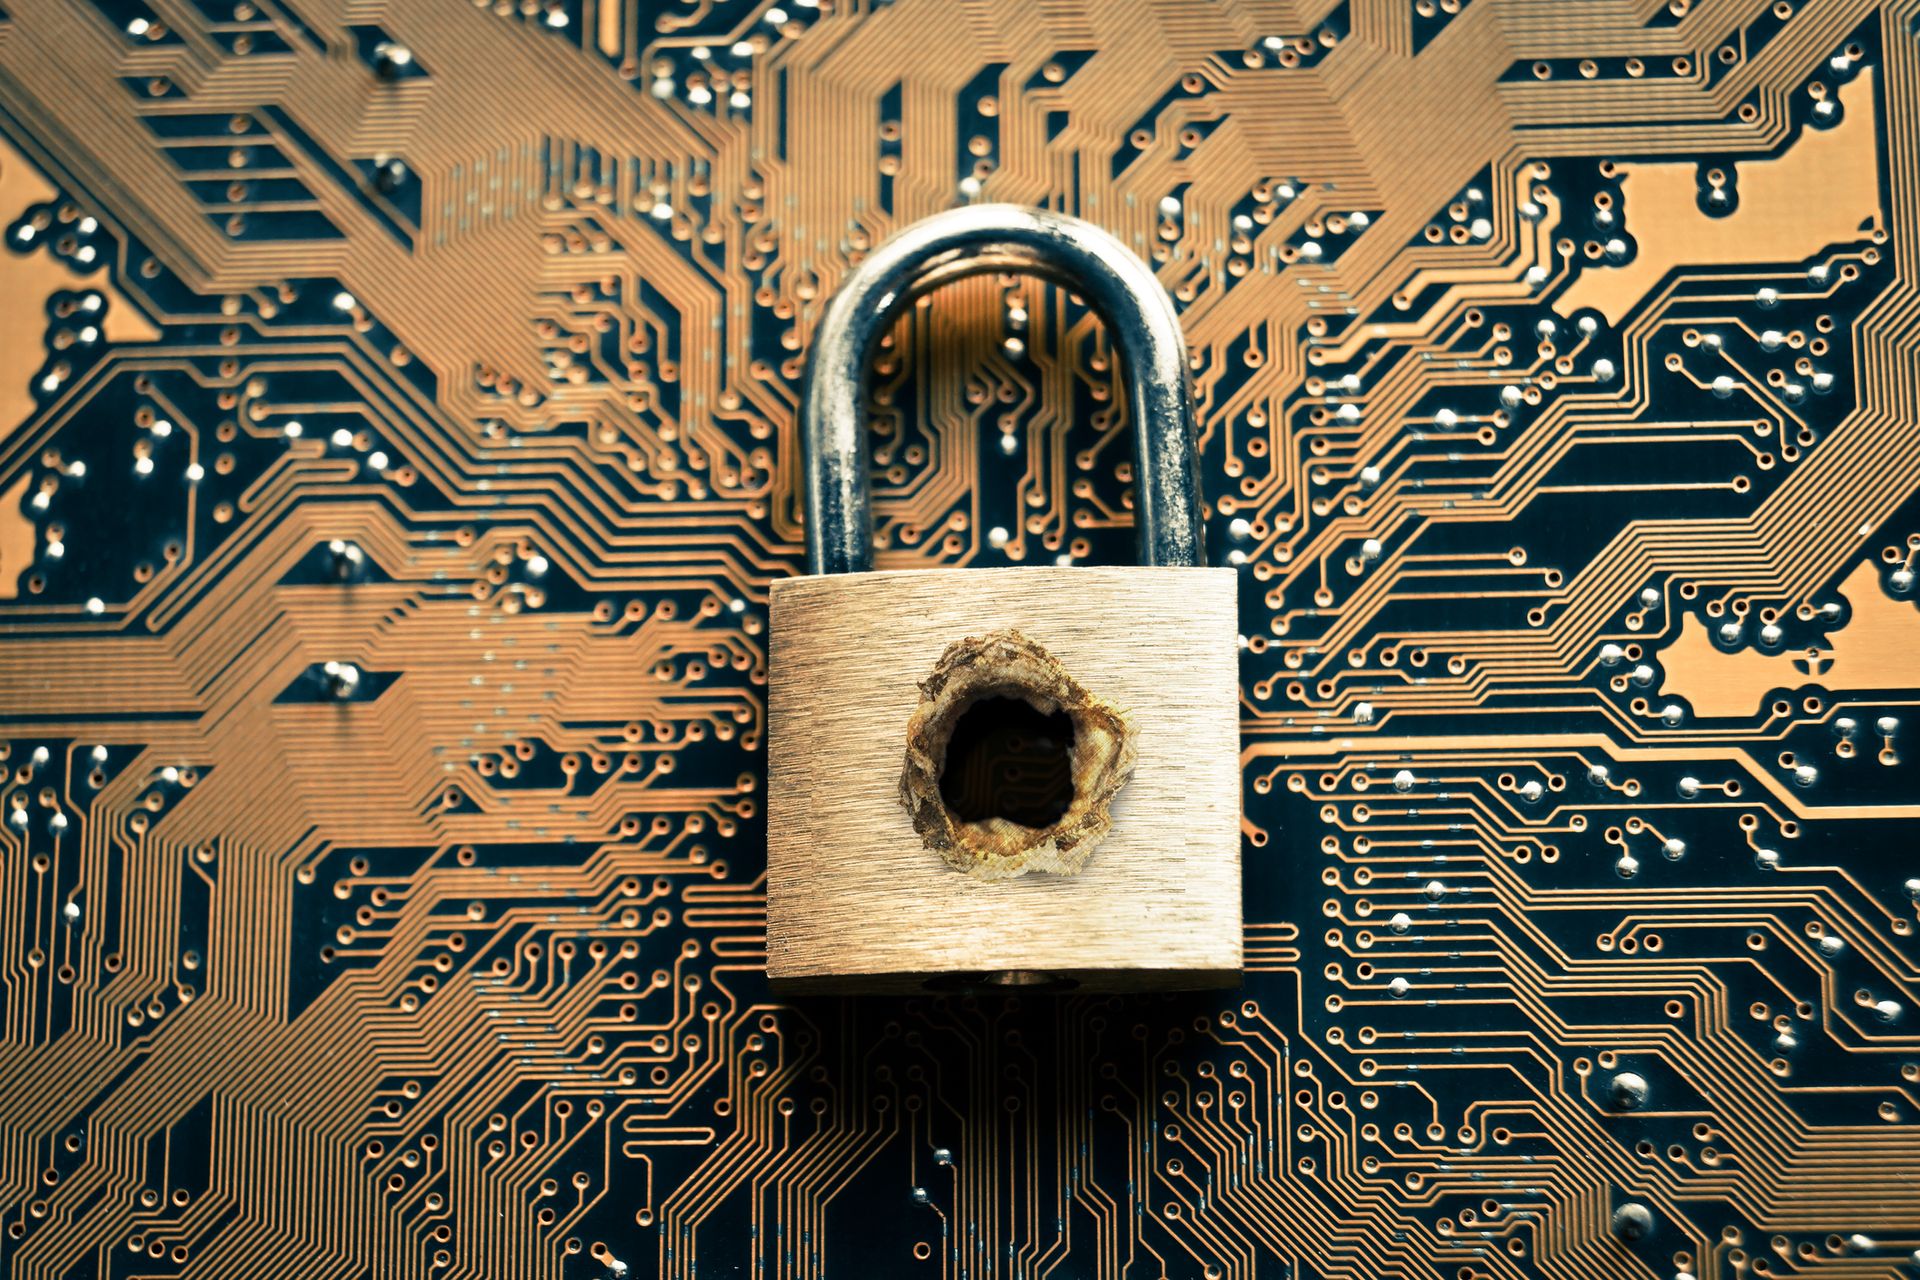 A penetrated security lock with a hole on computer circuit board background